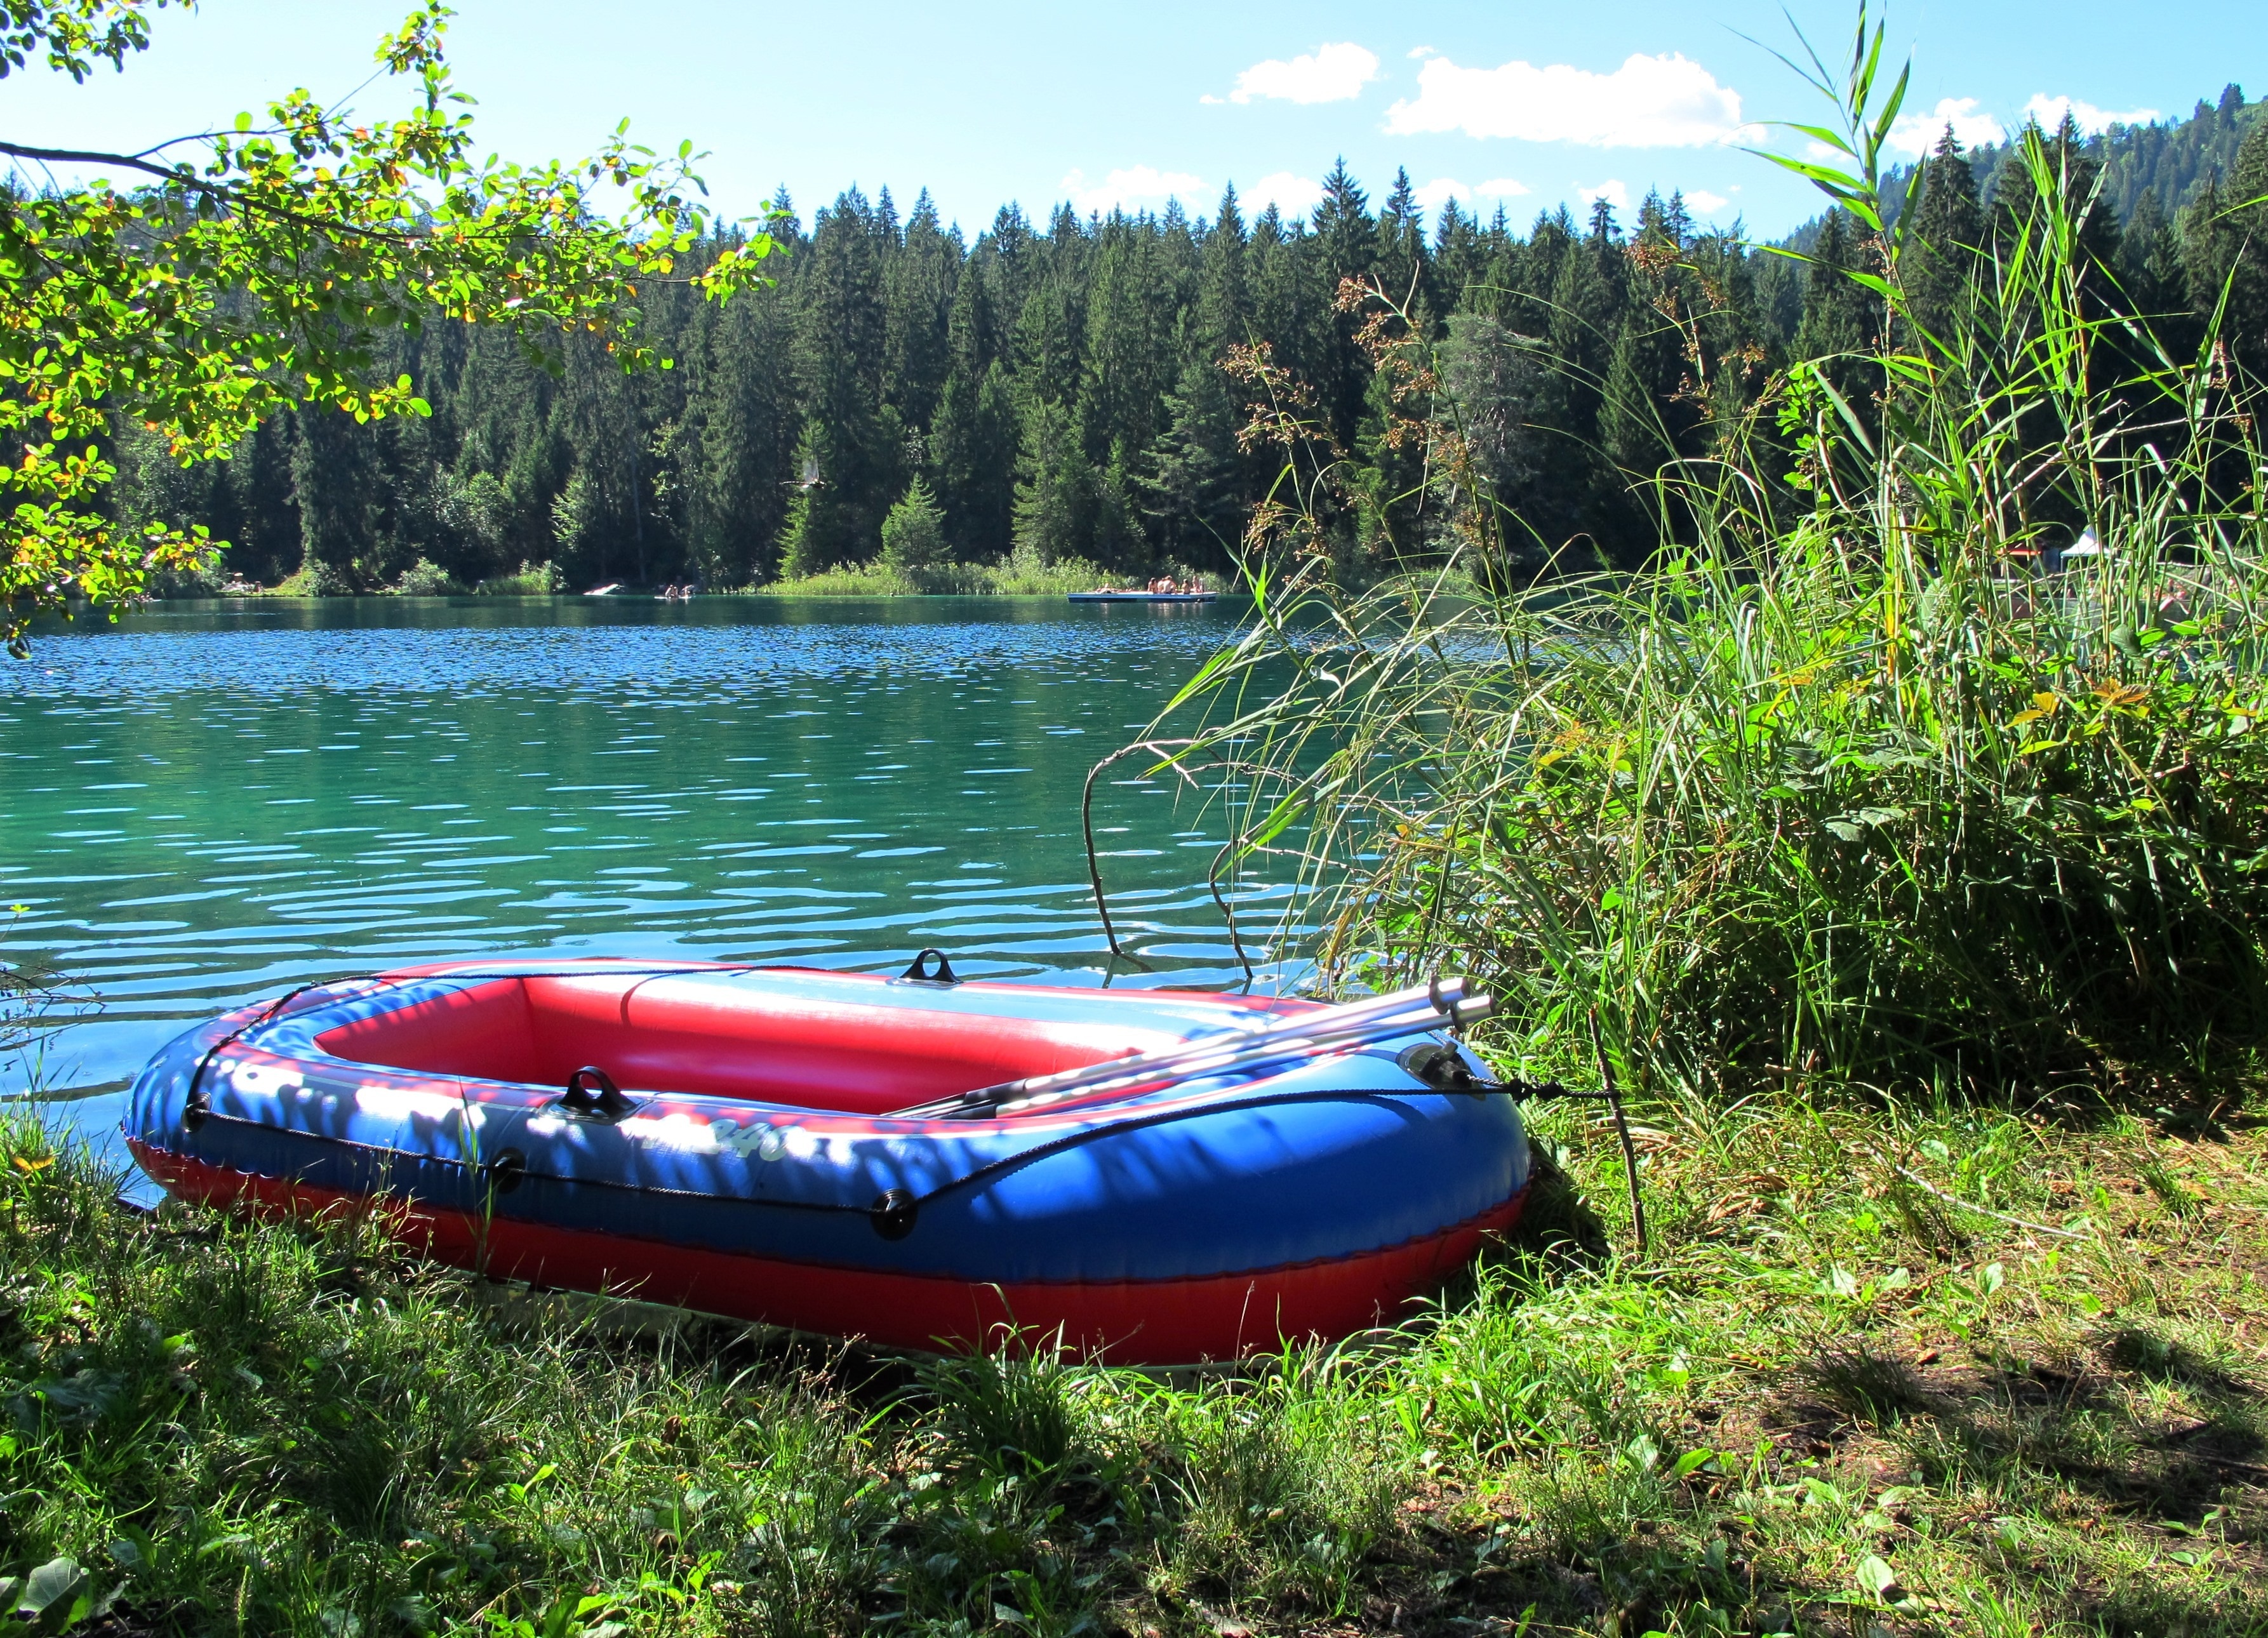 red and blue inflatable boat on green grass